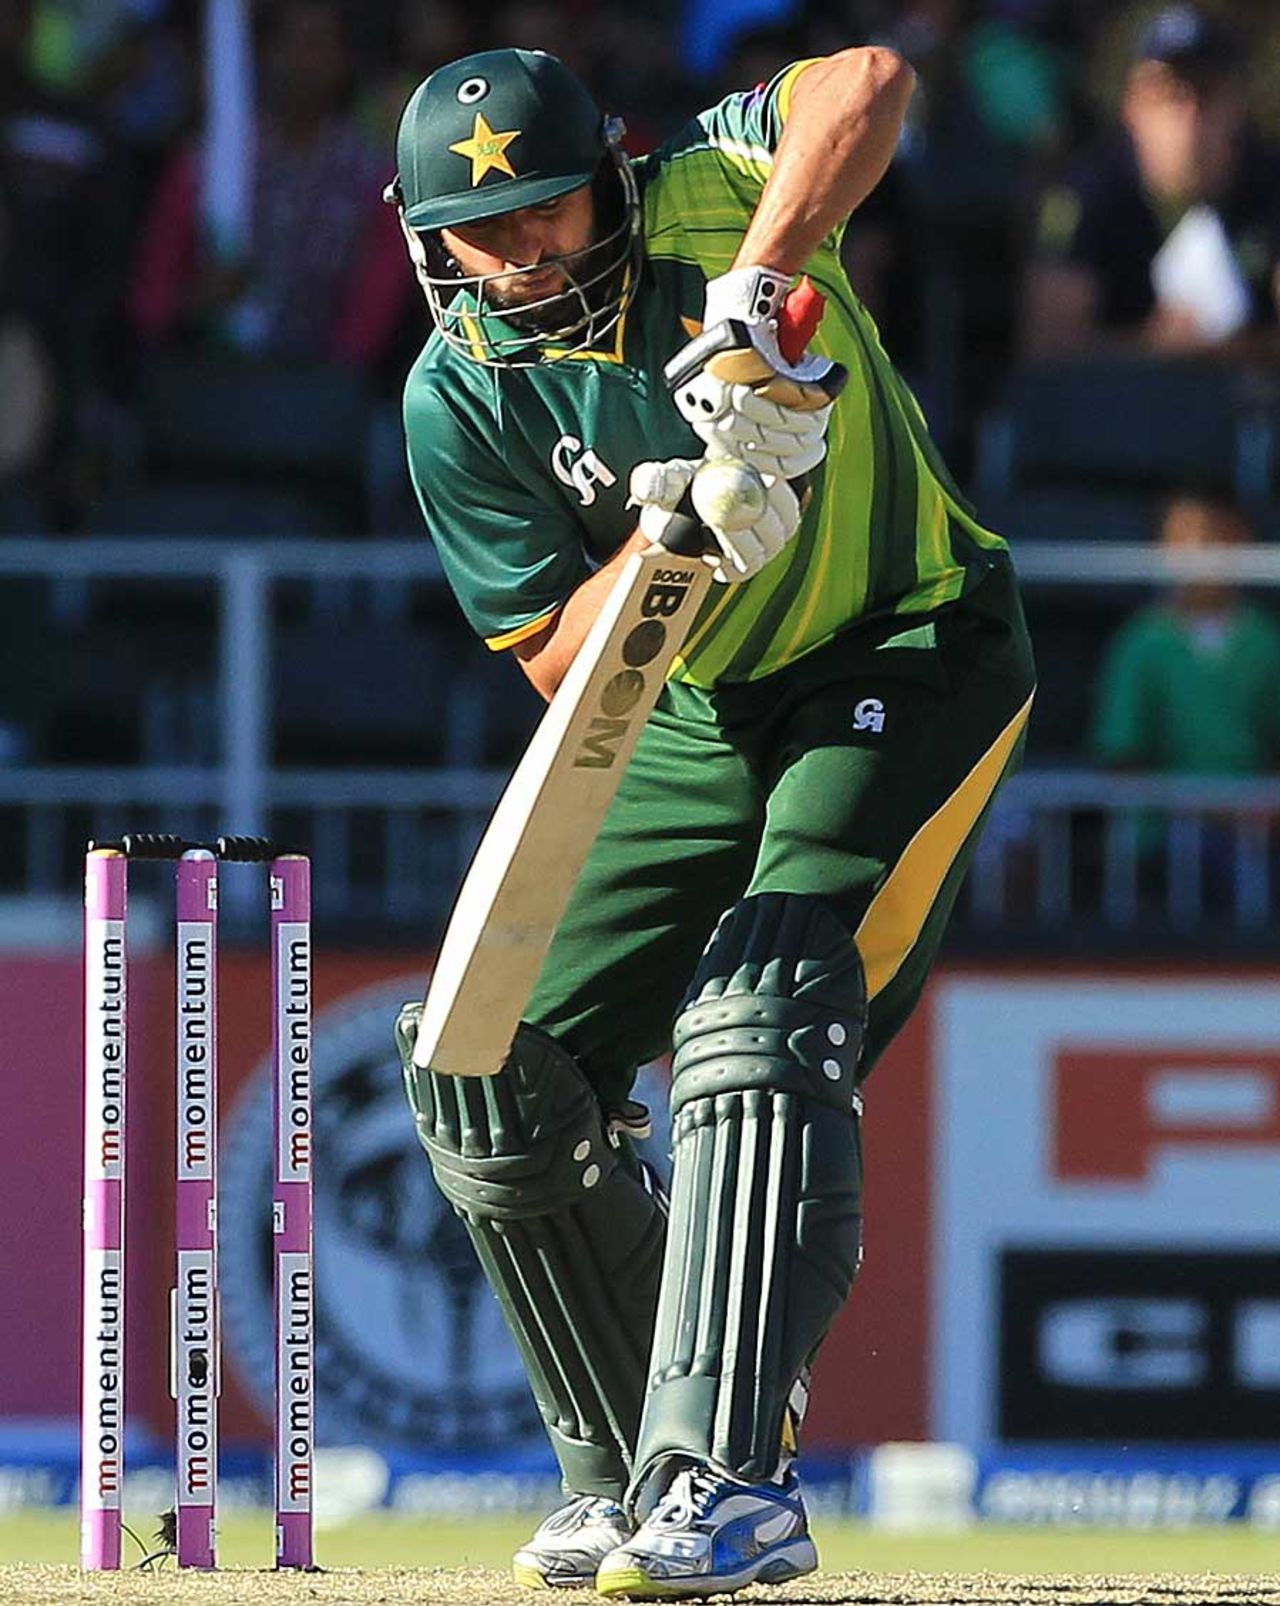 Shahid Afridi was struck on the thumb, South Africa v Pakistan, 3rd ODI, Johannesburg, March 17, 2013